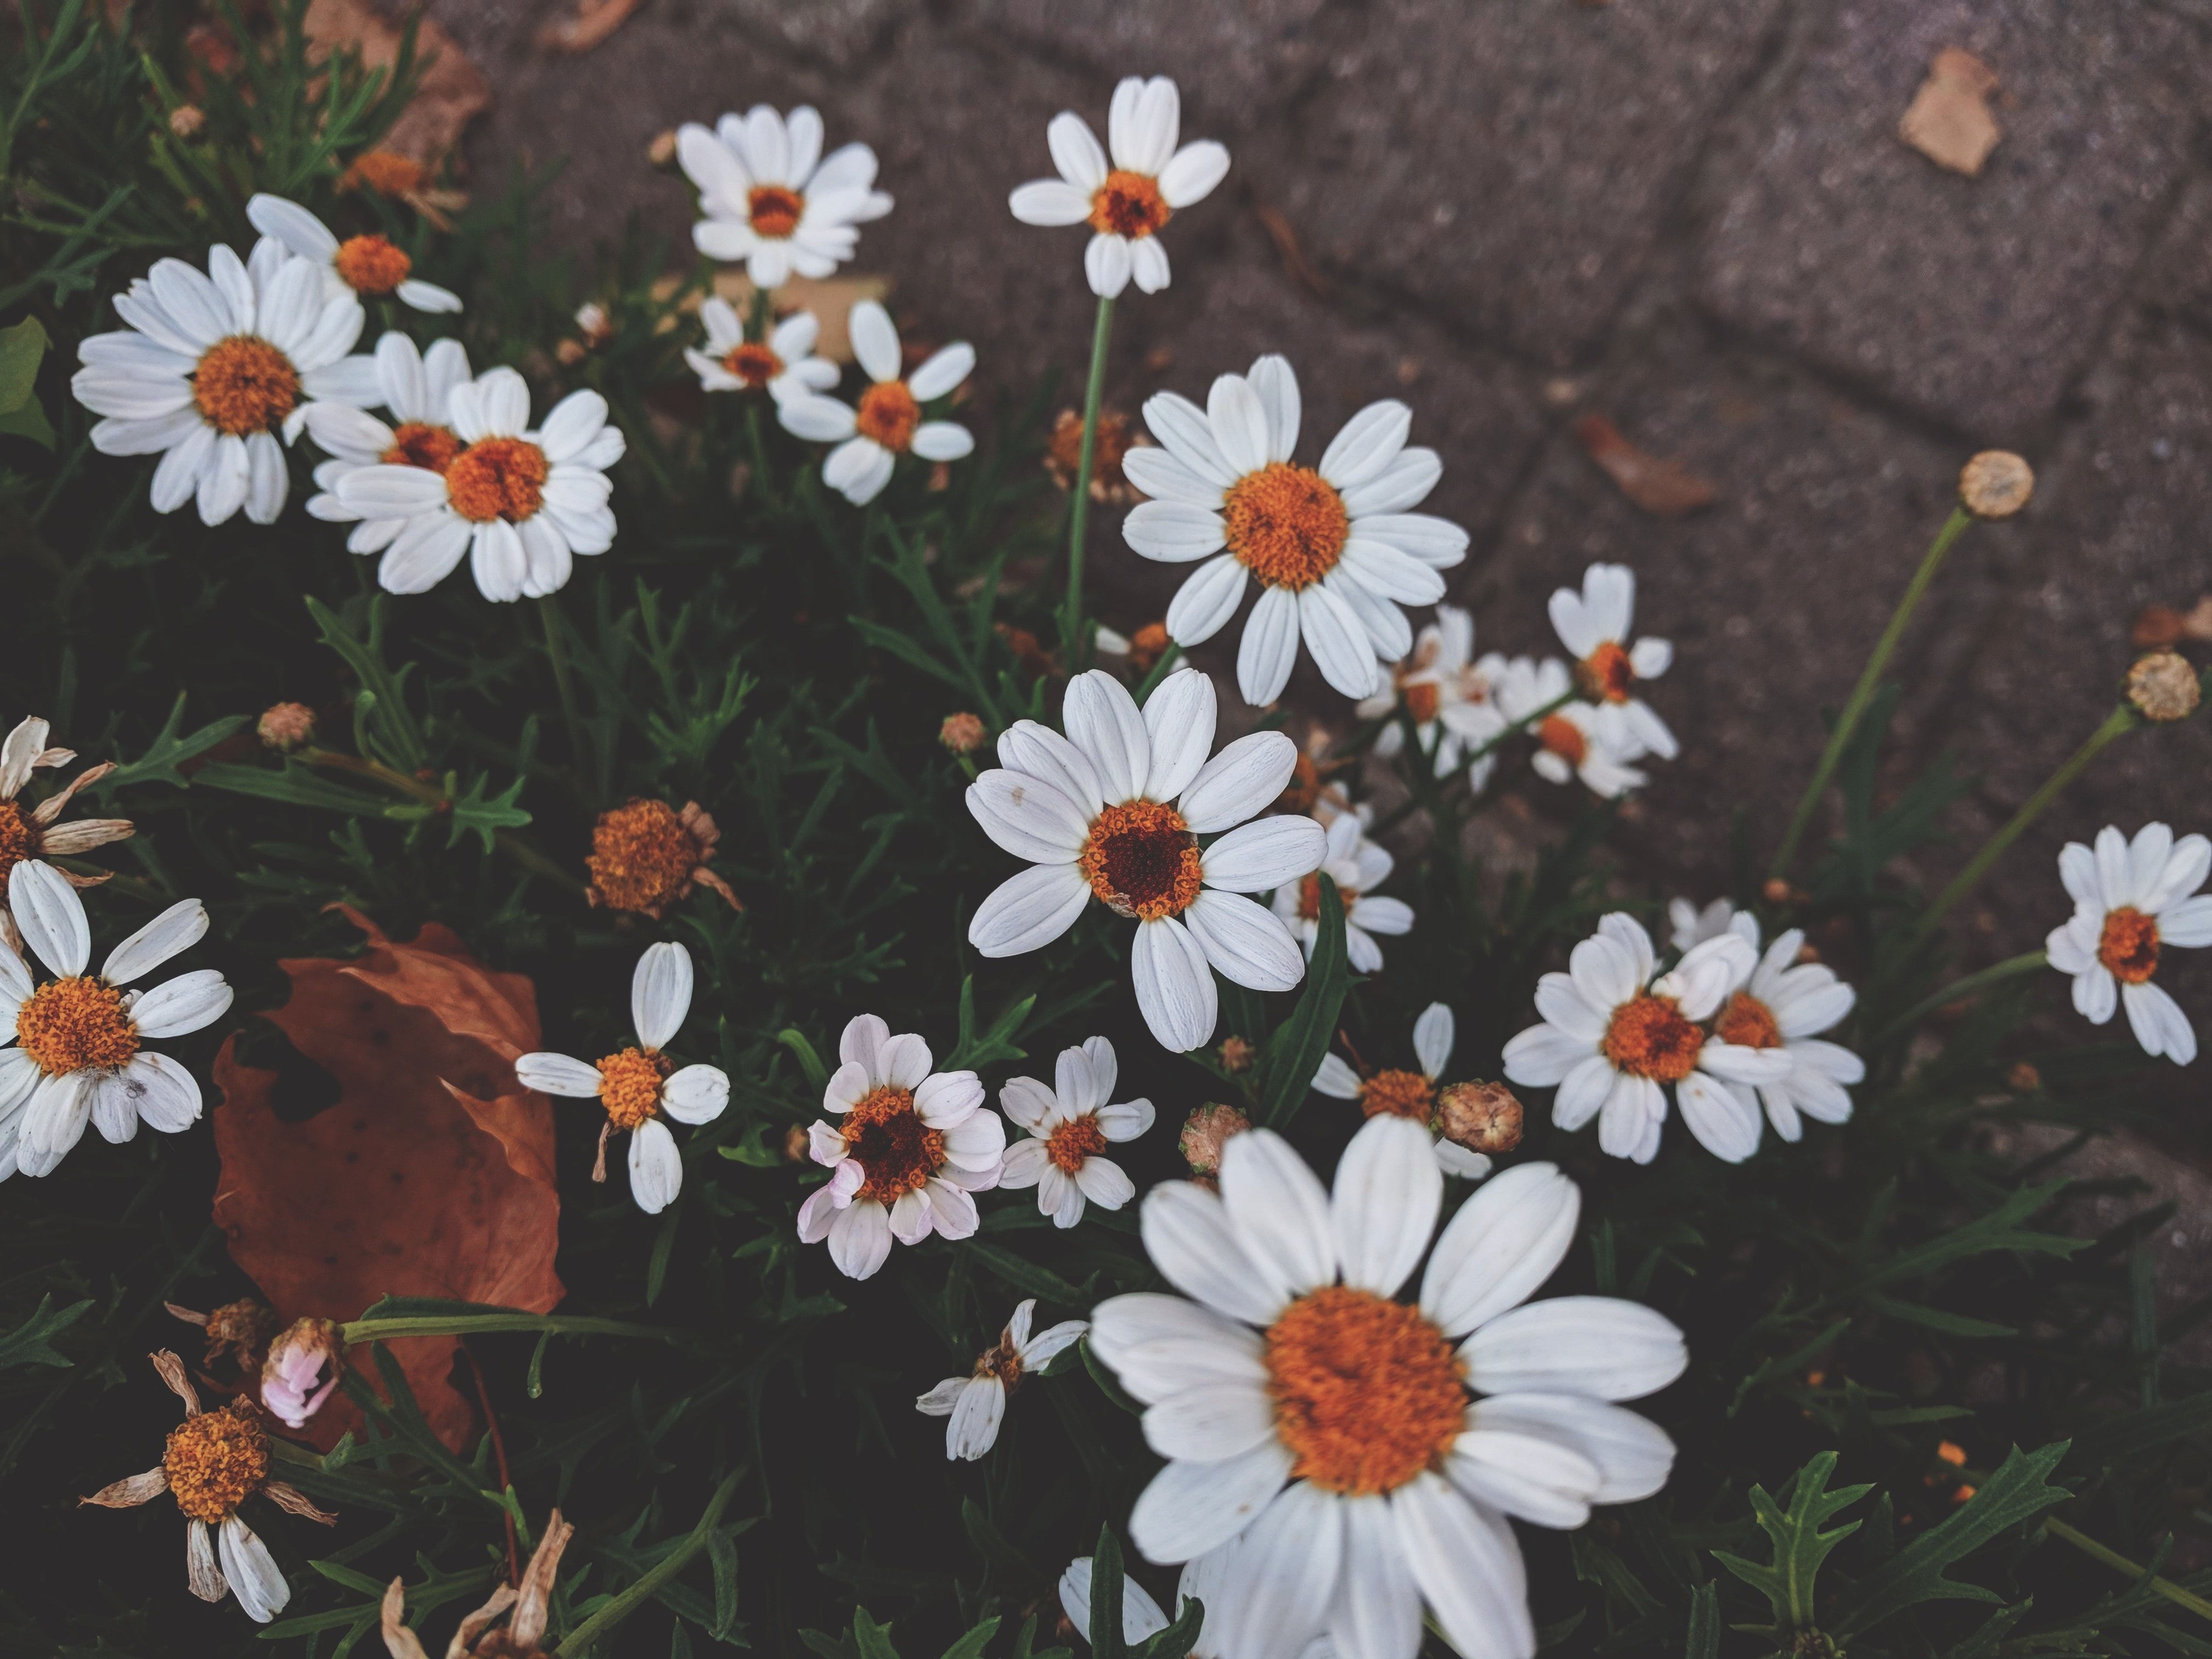 A close up of some white flowers - Daisy